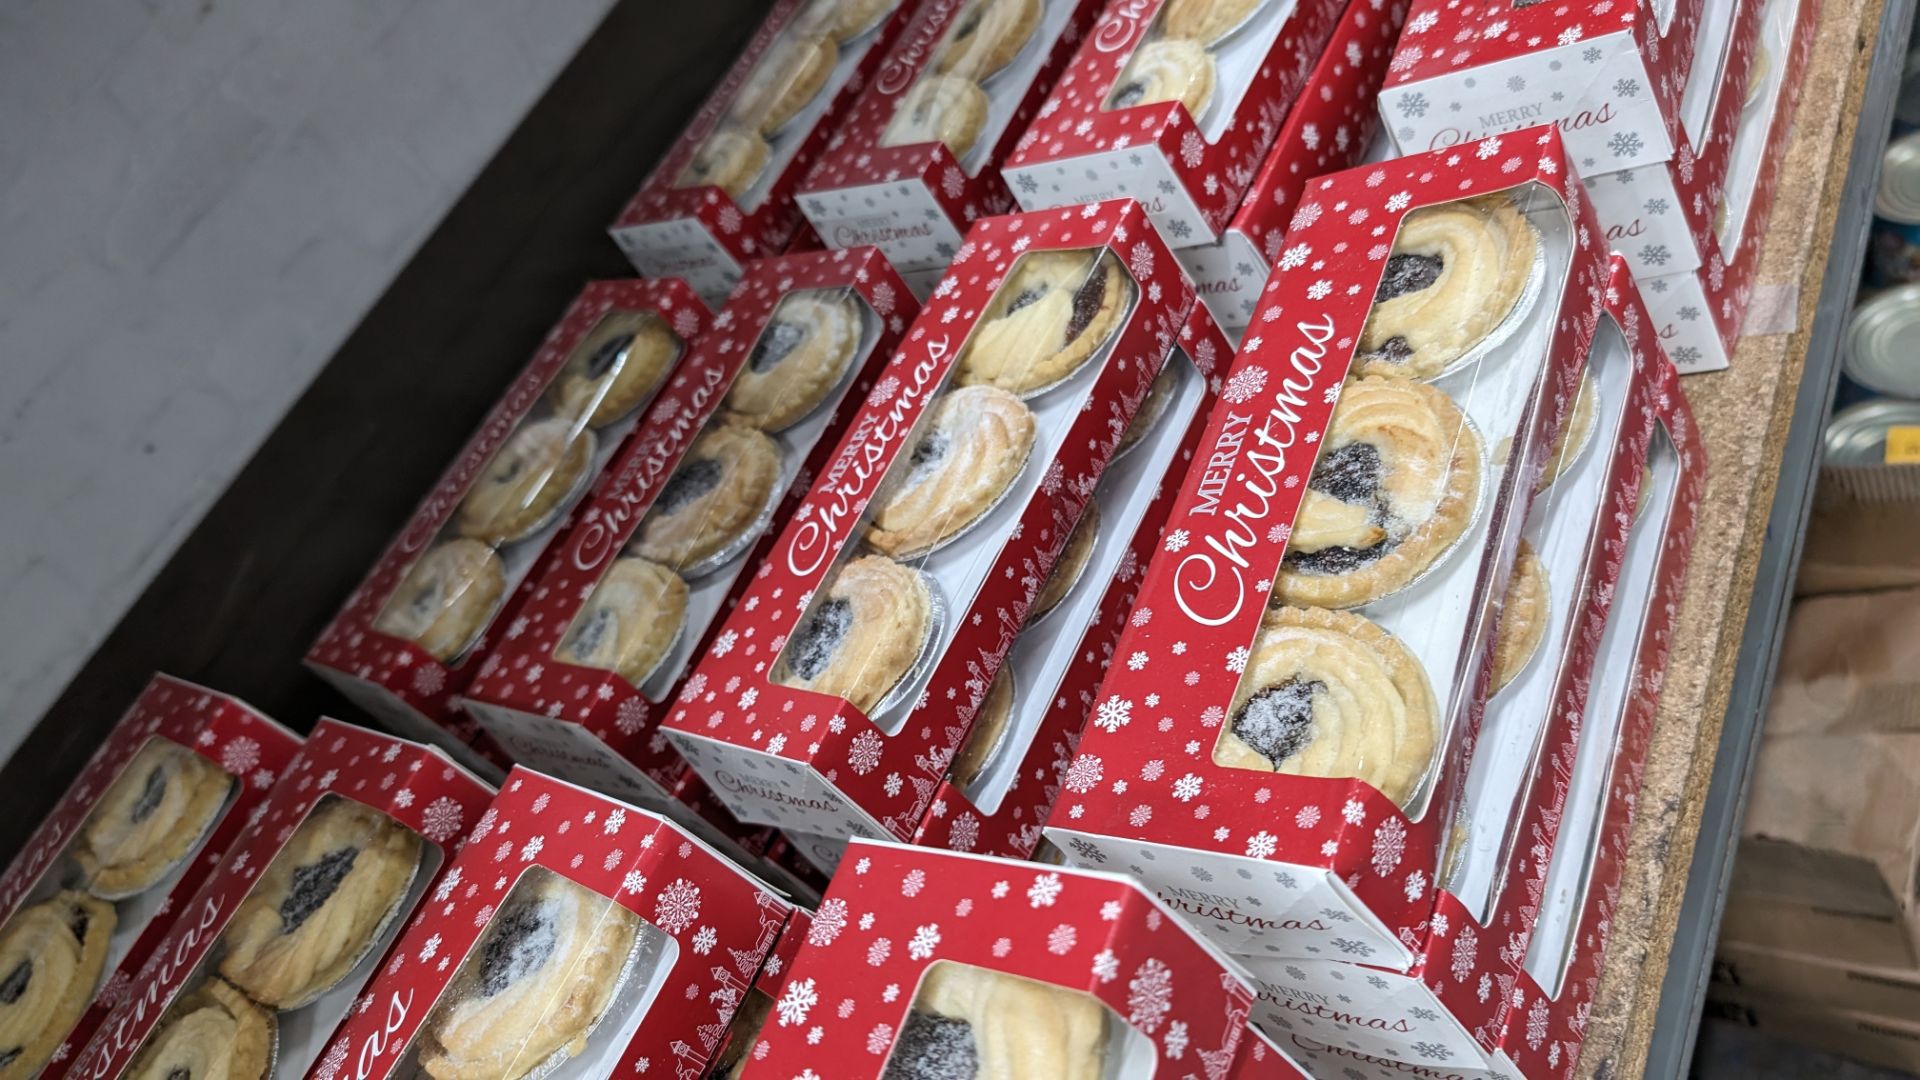 40 off 6 packs of Christmas mince pies. Each pack contains 6 pies on 2 layers & comes in Merry Chri - Image 7 of 10